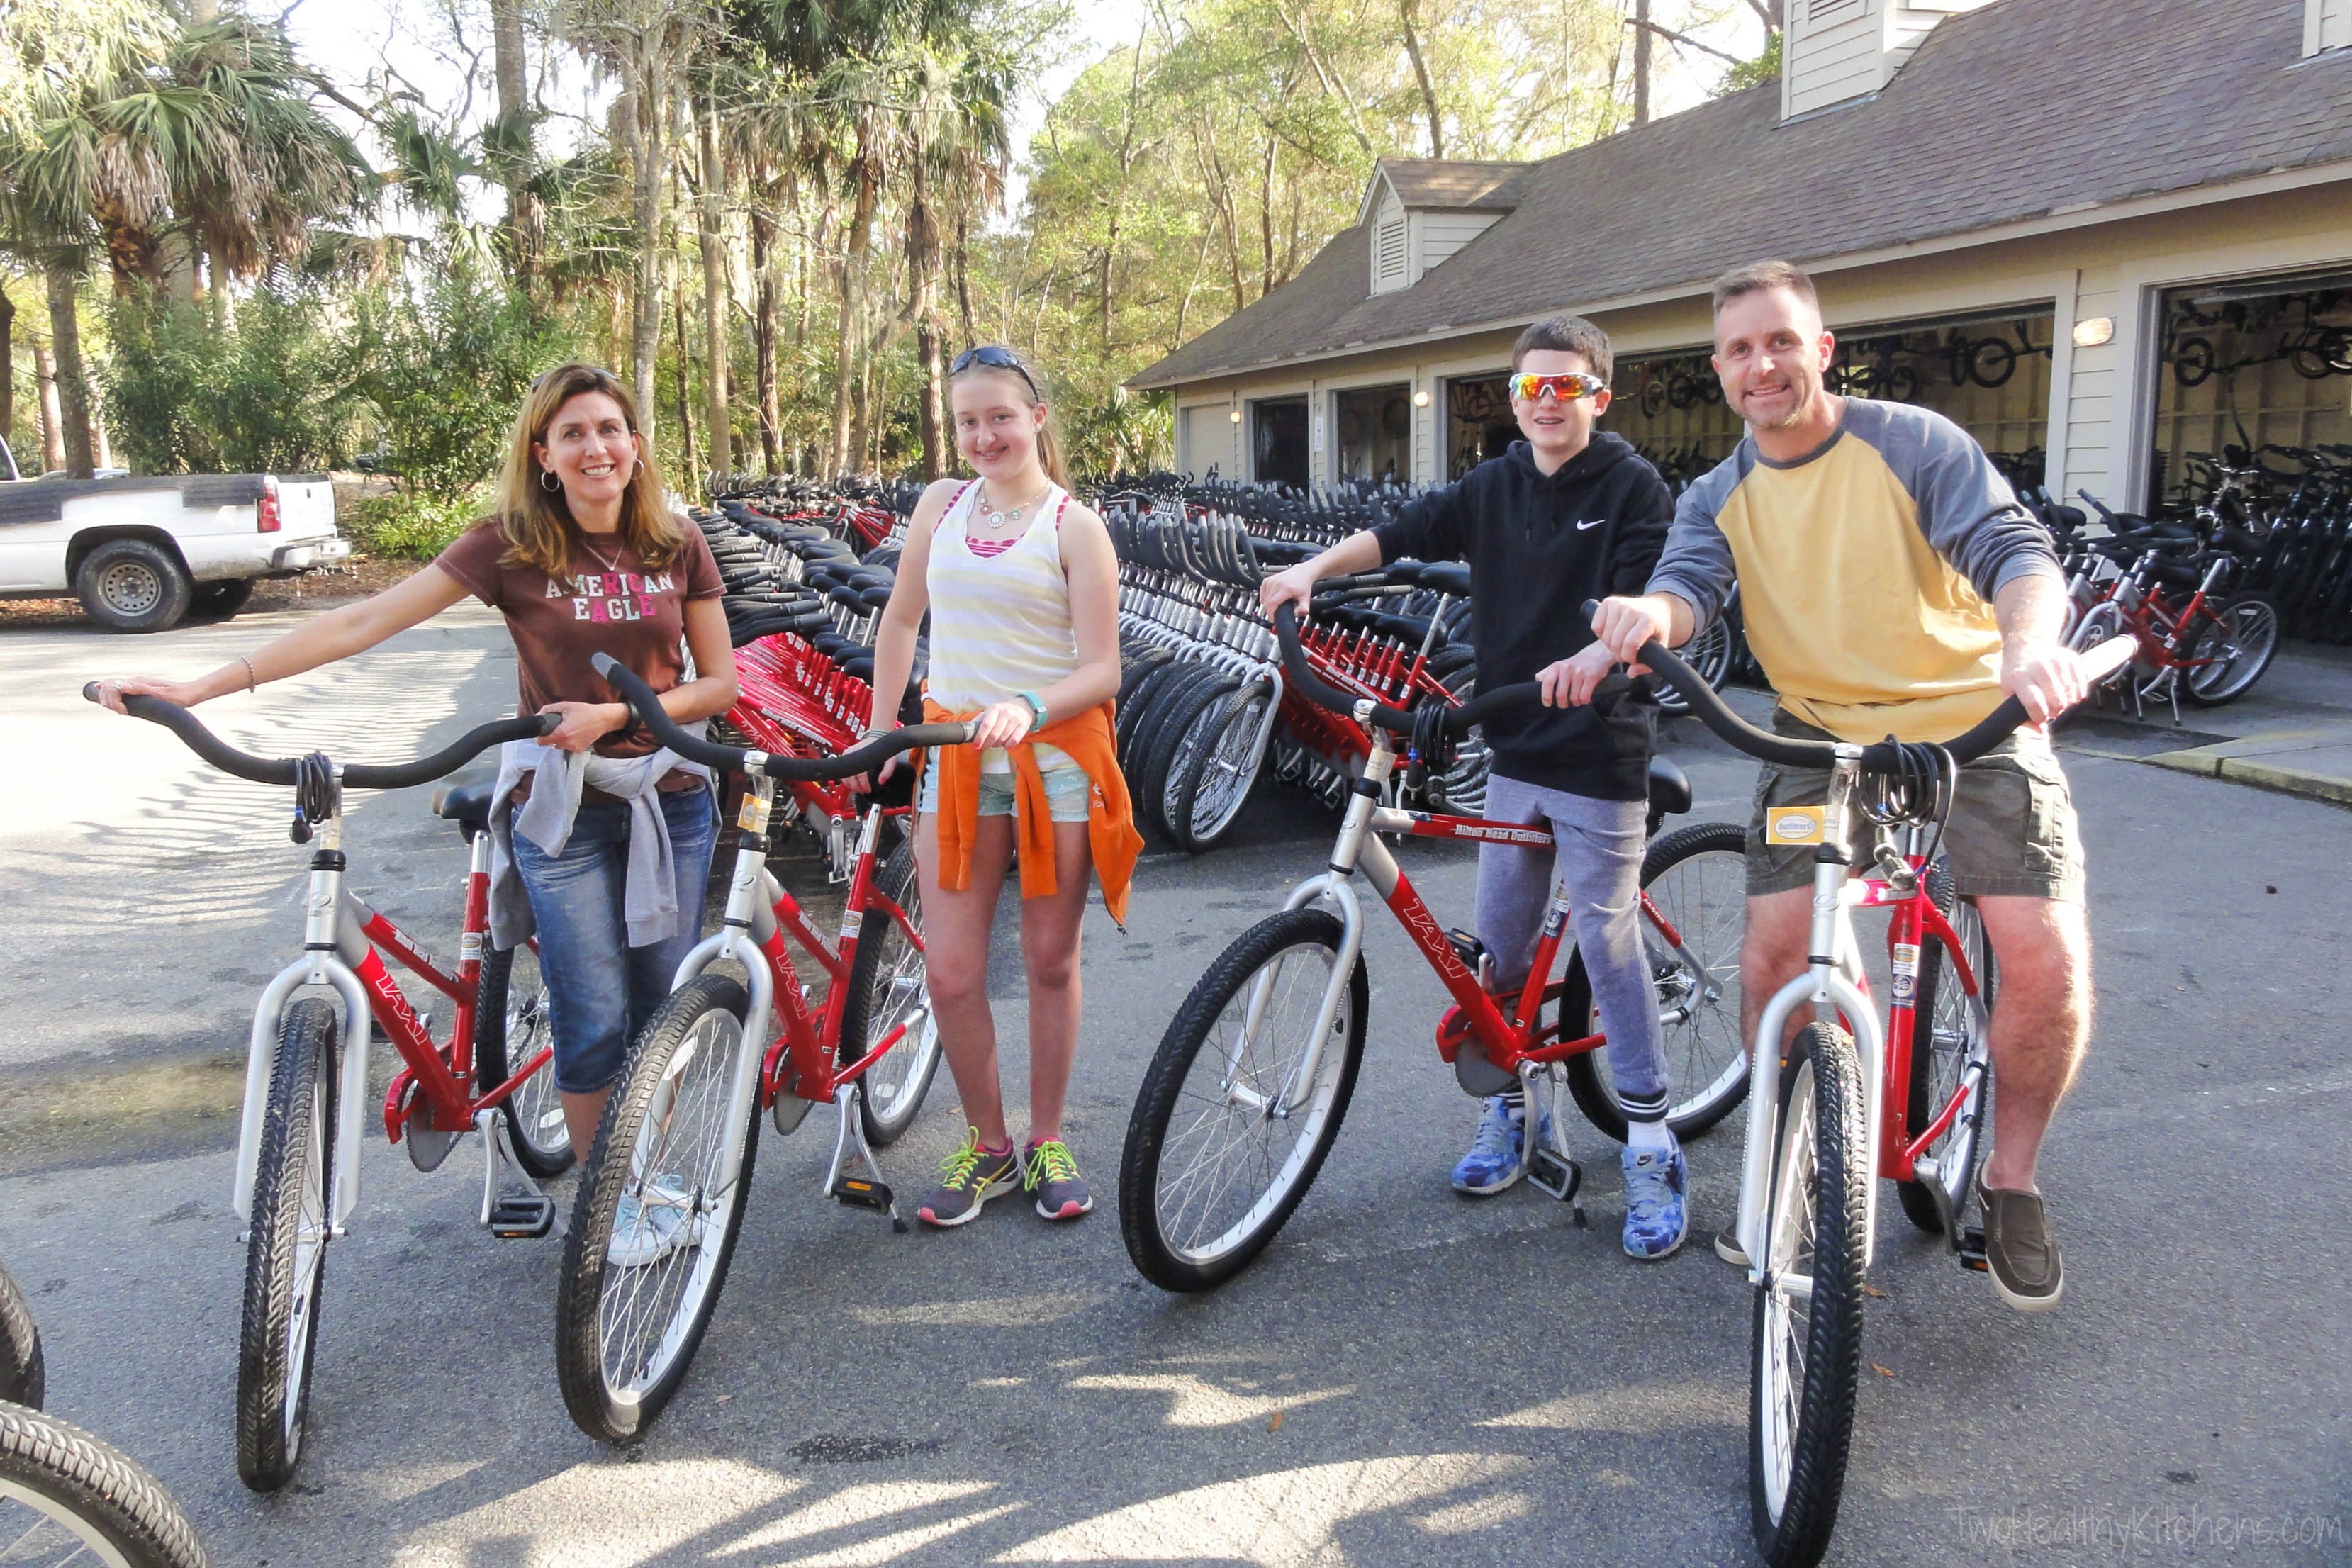 Family posed with red bikes in front of bike rental shop.